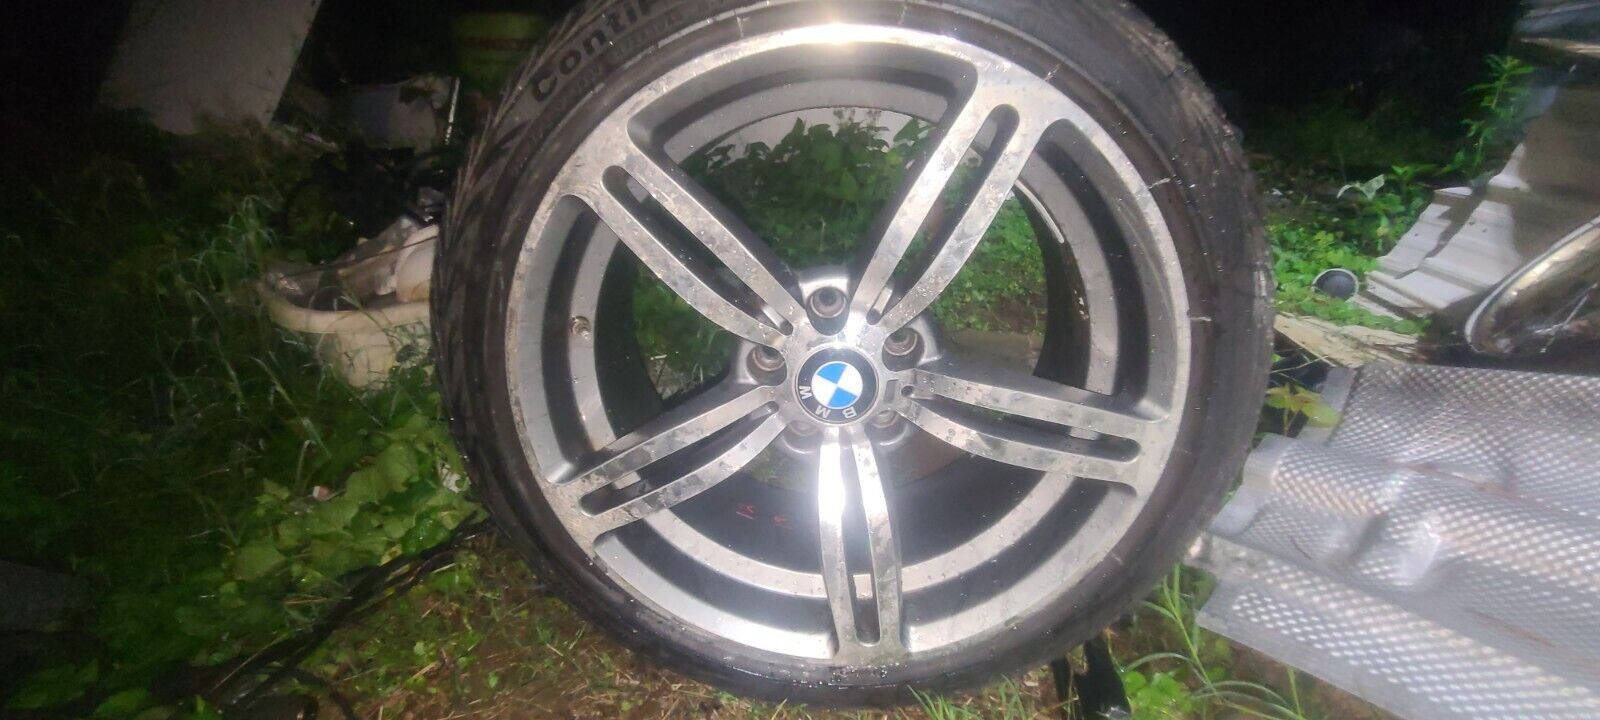 M Series BMW wheel With 19 Inch Continental Tire